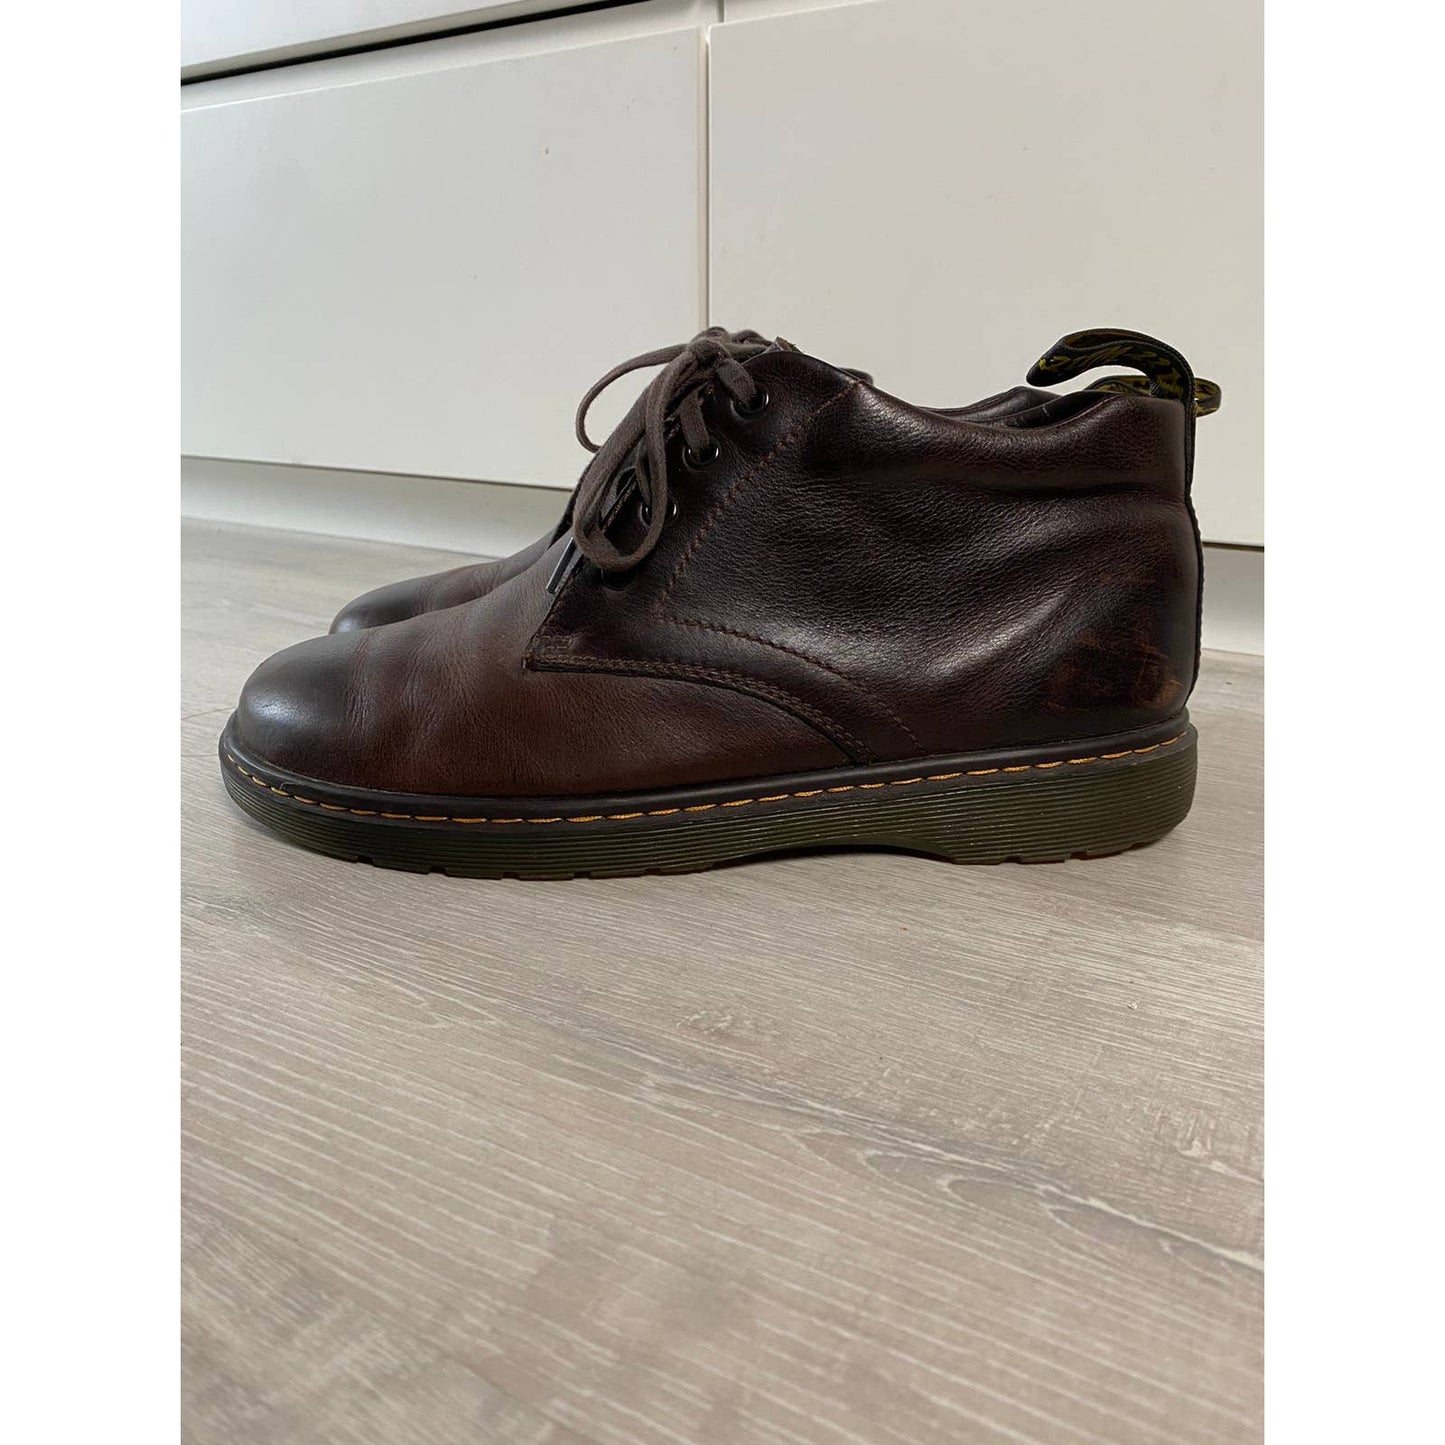 Dr. Martens barnie brown leather shoes casual vintage